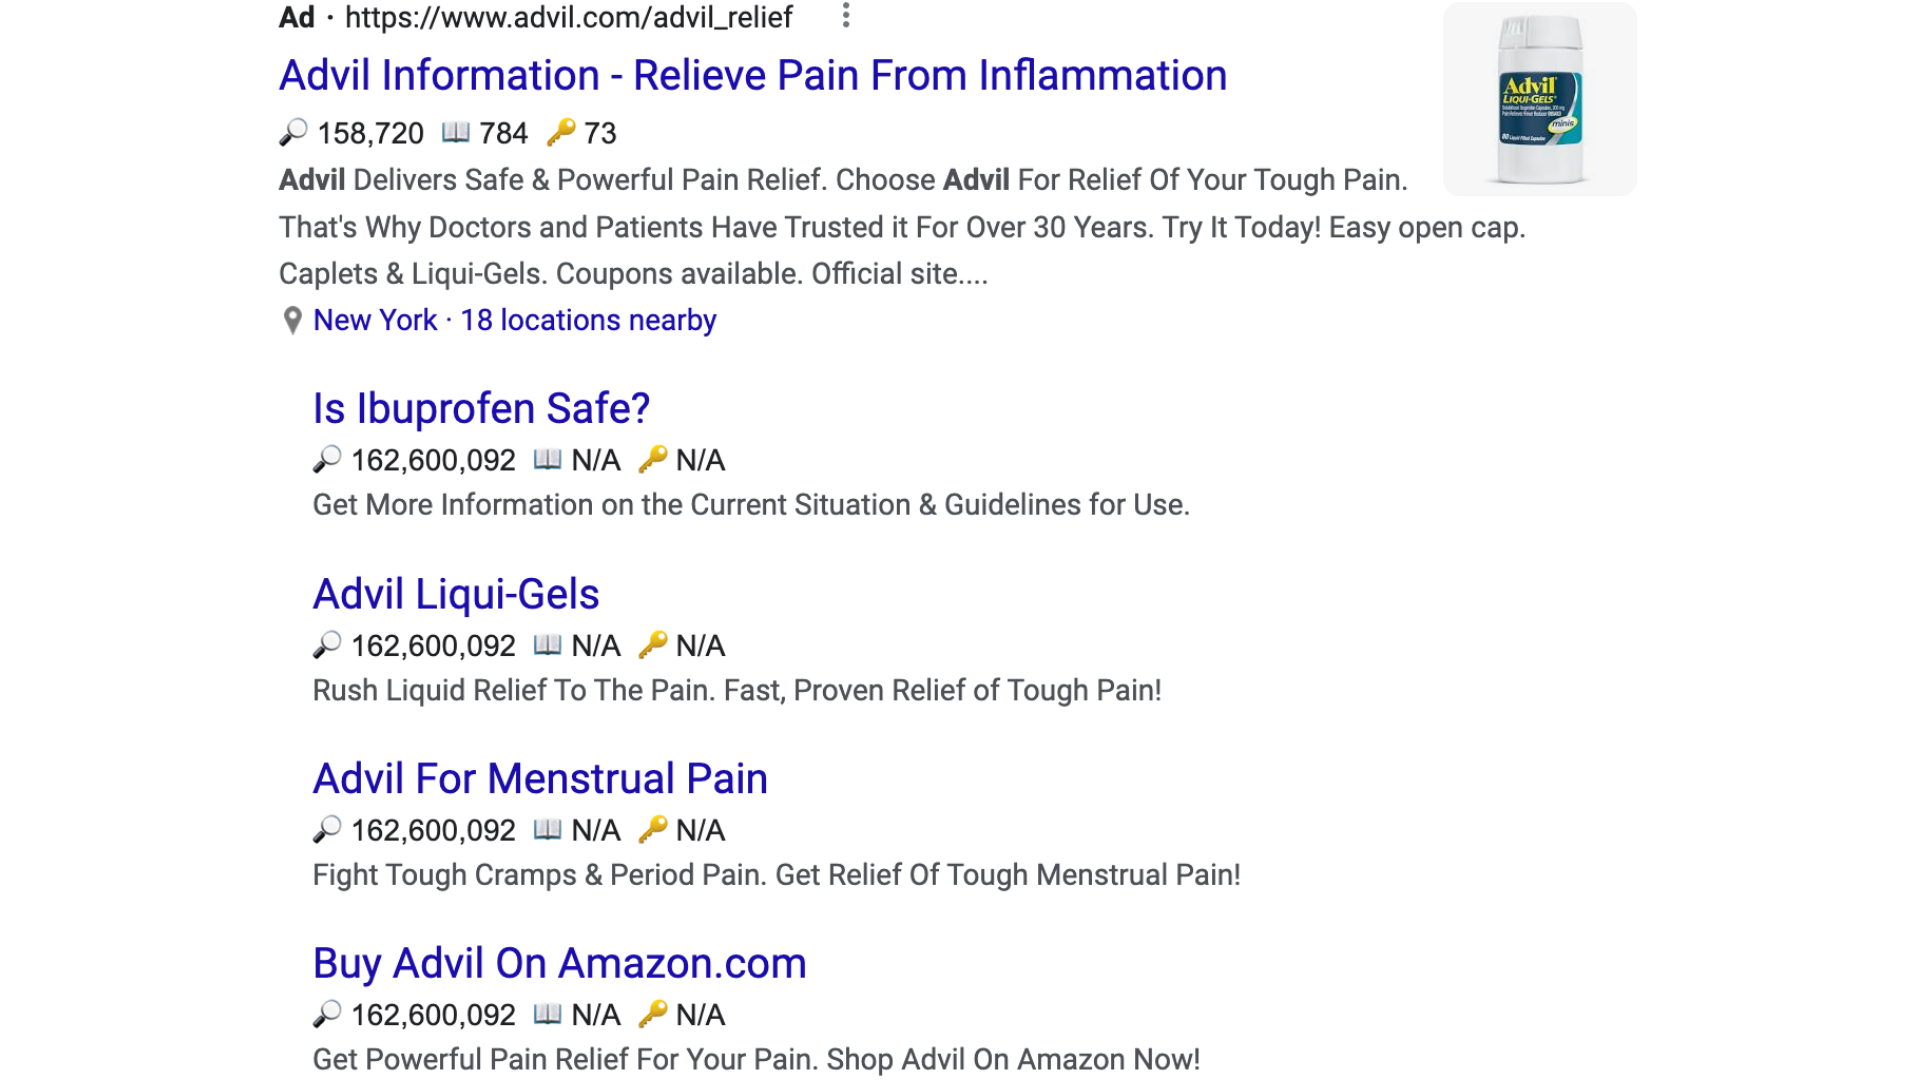 An illustration of pharma ads placements in search.